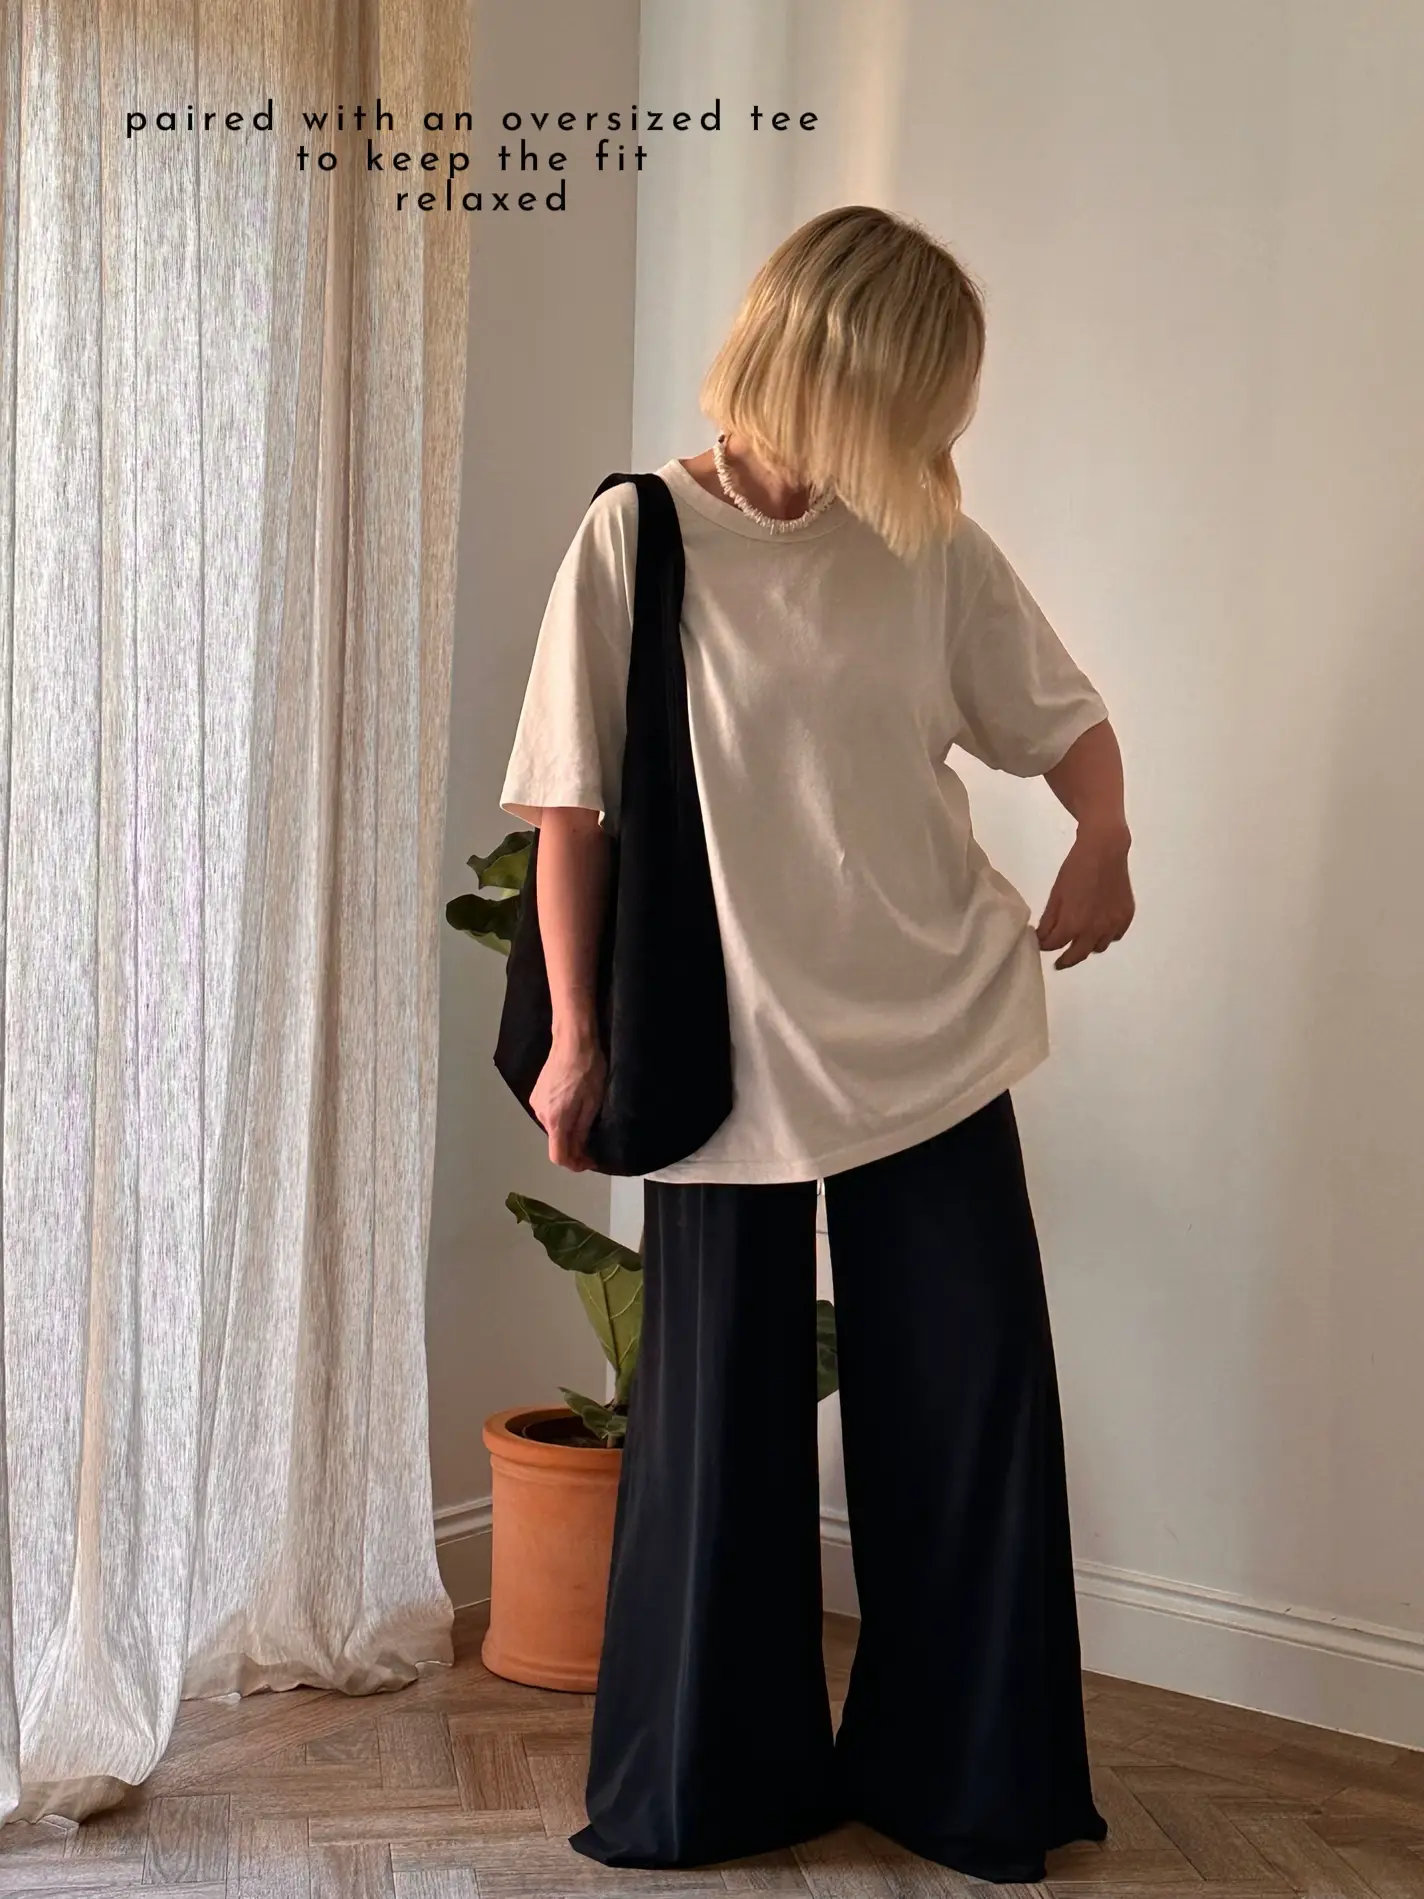 gifted Halara sent me a few of their newest pant styles - let me know